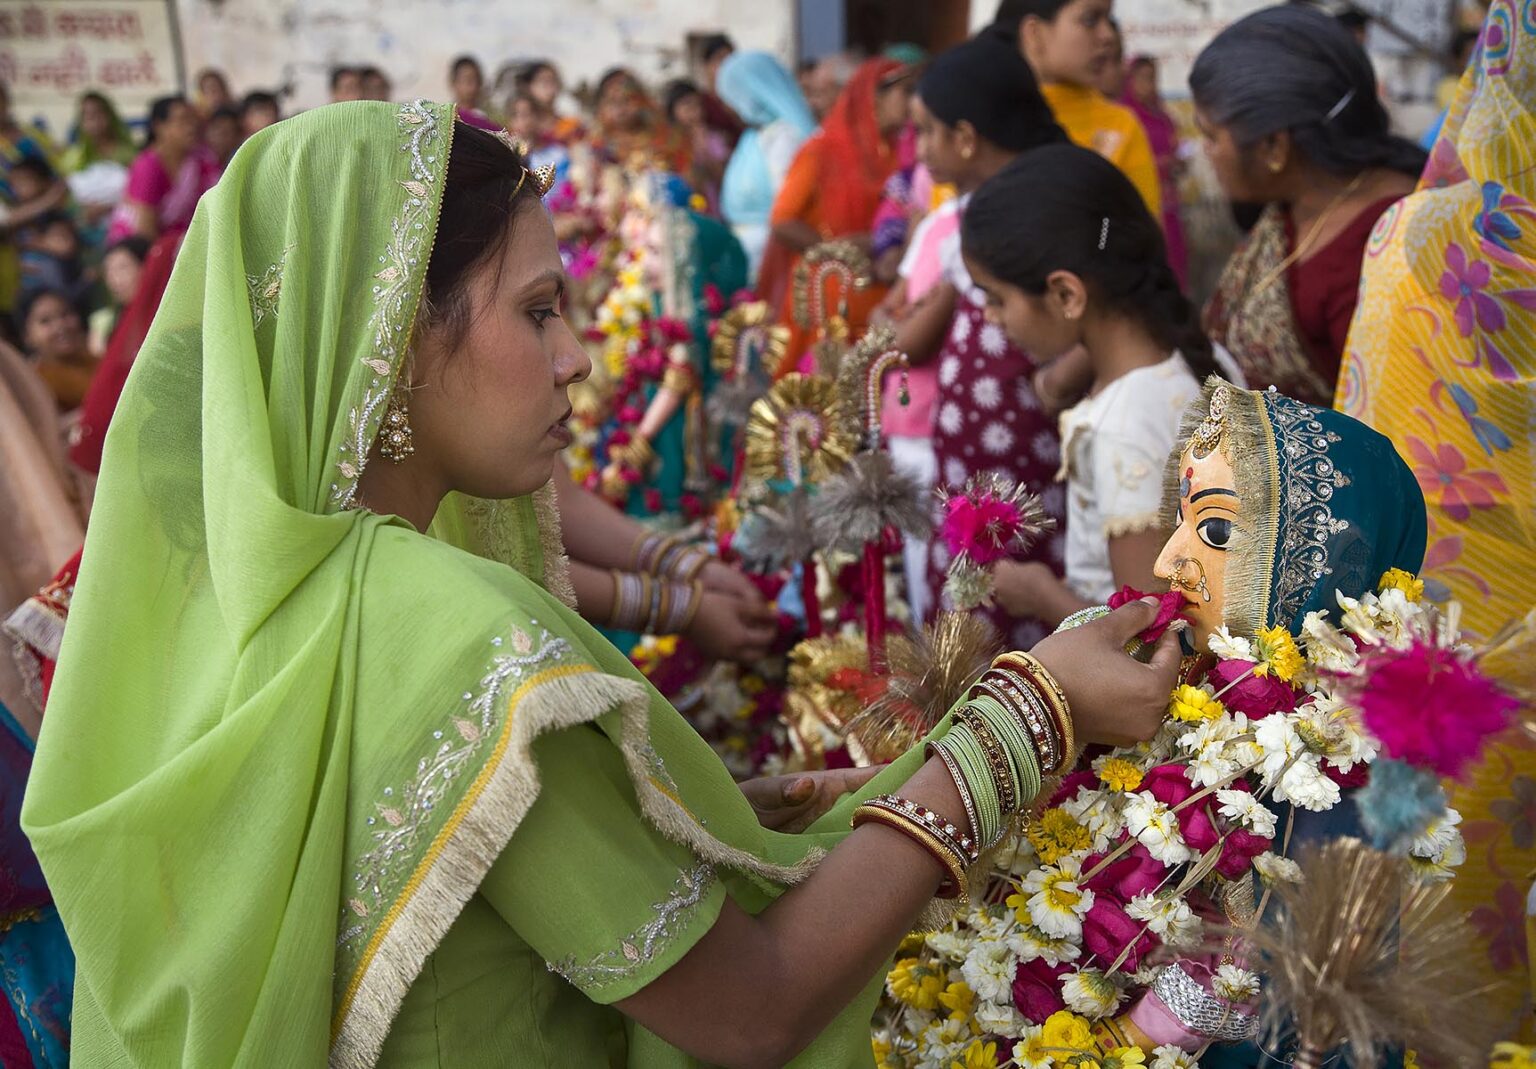 A Rajasthani woman makes a flower offerting to Shiva's wife PARVATI at the GANGUR FESTIVAL also known as the MEWAR FESTIVAL in UDAIPUR - RAJASTHAN, INDIA